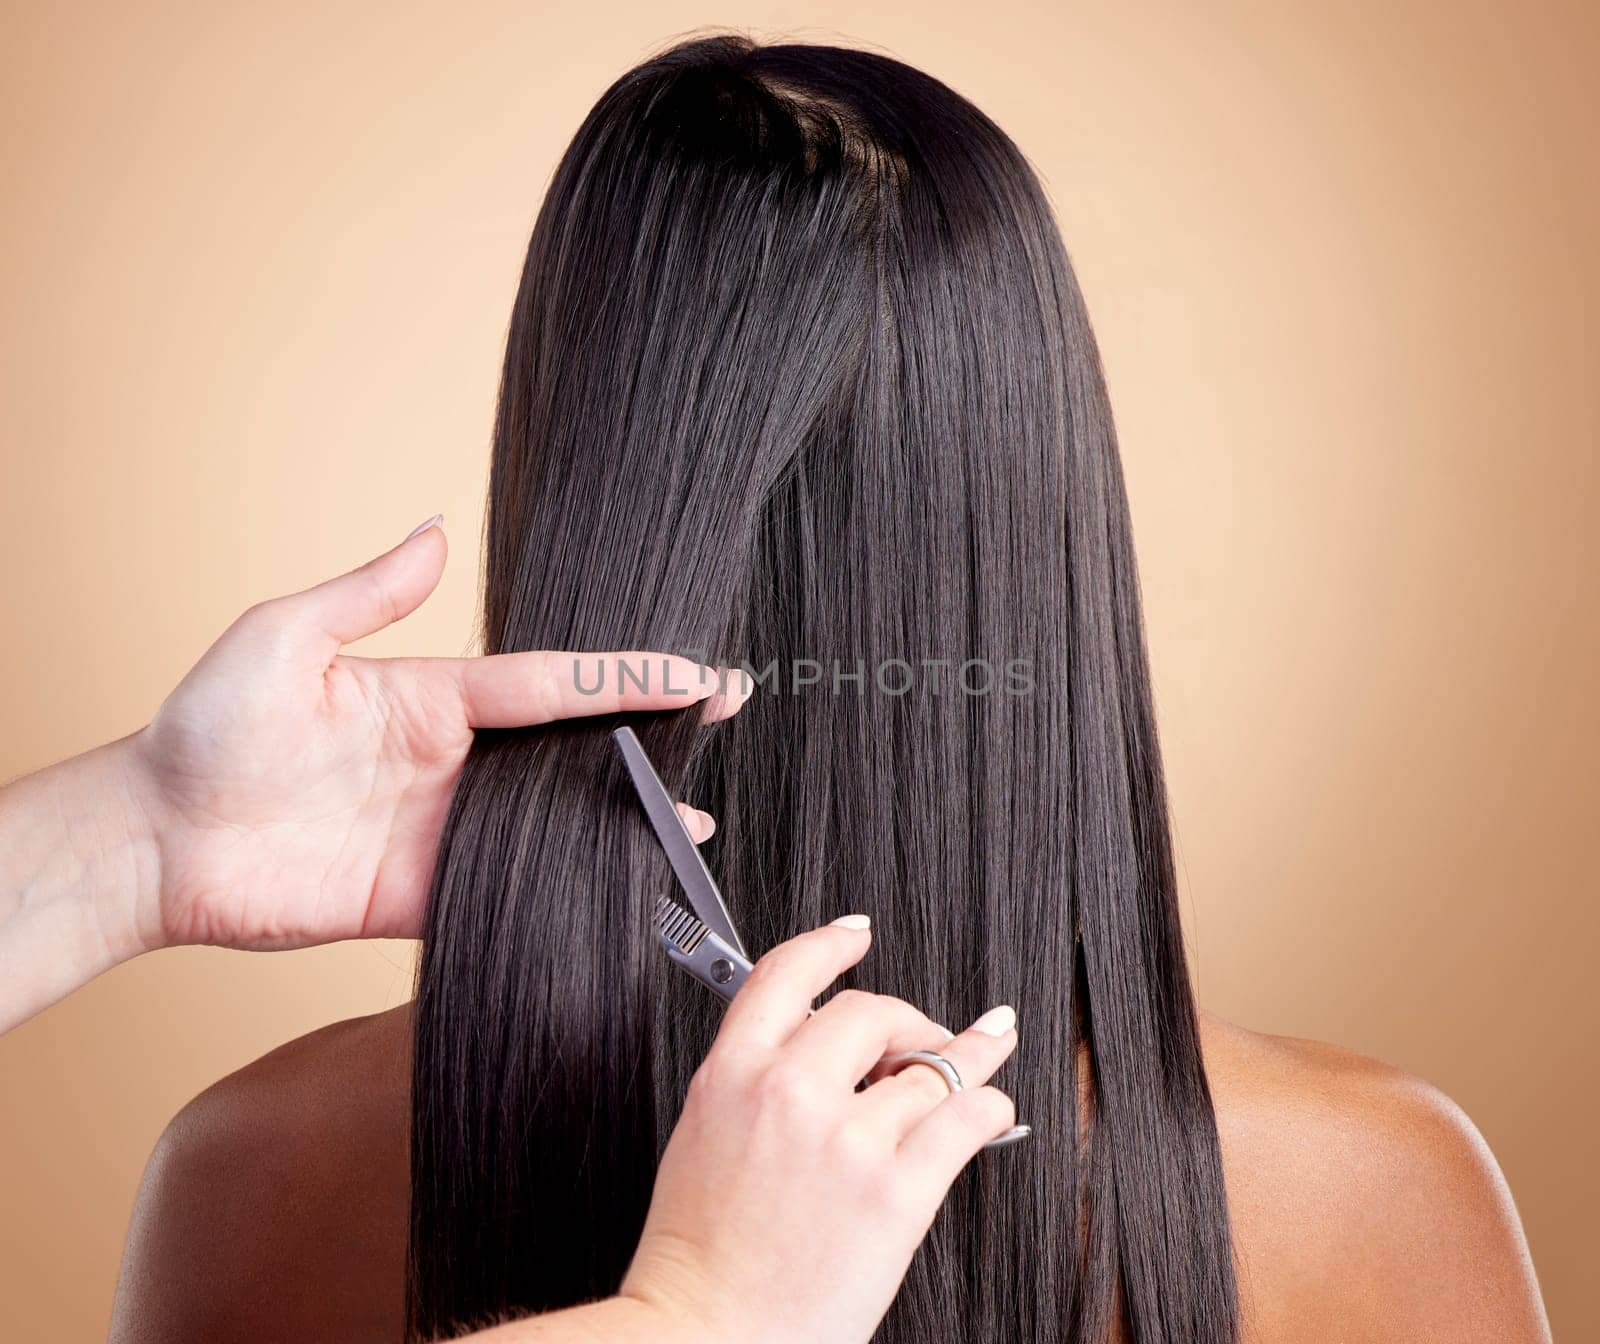 Back view, hands cut hair and woman, beauty and shine, cosmetic care isolated on studio background. Female people at hairdresser salon, scissors and makeover transformation with texture and trim by YuriArcurs